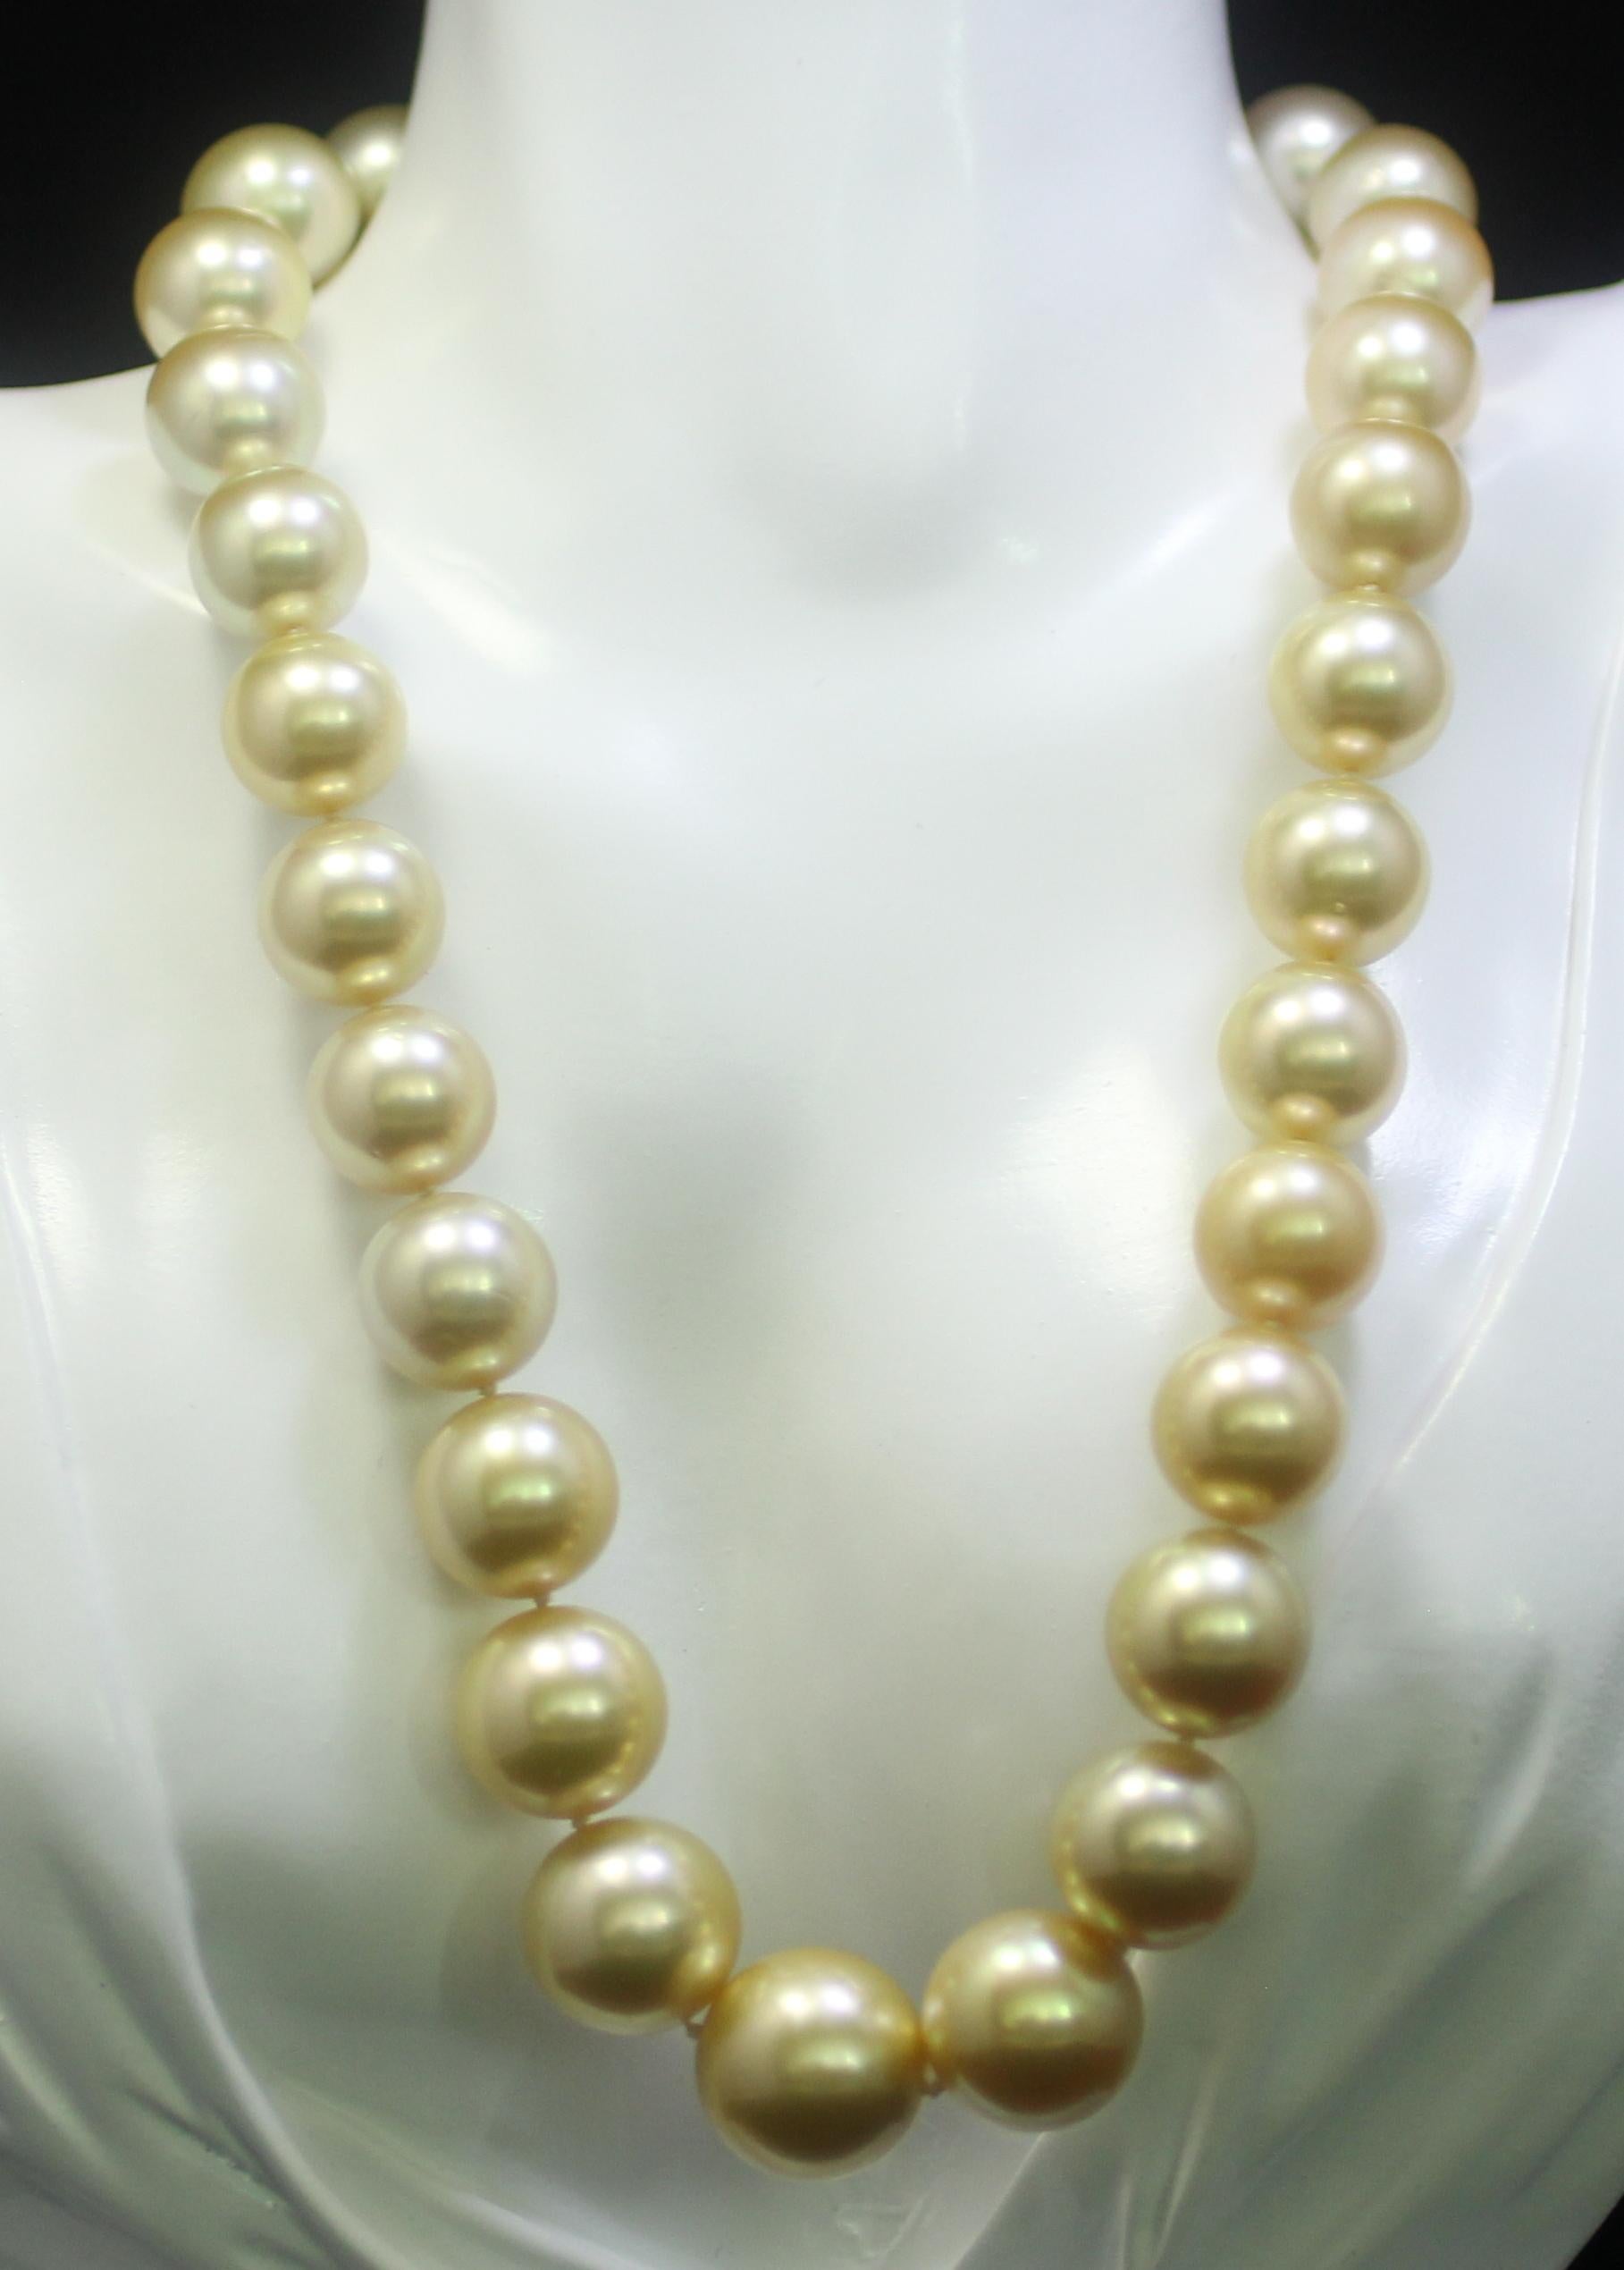 Hakimoto By Jewel Of Ocean 18K Natural Golden Color South Sea Pearl Strand Necklace
18K White Gold  1.75 Carts Diamonds Clasp
Weight (g): 124
Cultured Natural Color Golden South Sea Pearl 
Pearl Size: 13X16.8mm 
Pearl Shape: Round
Body color: